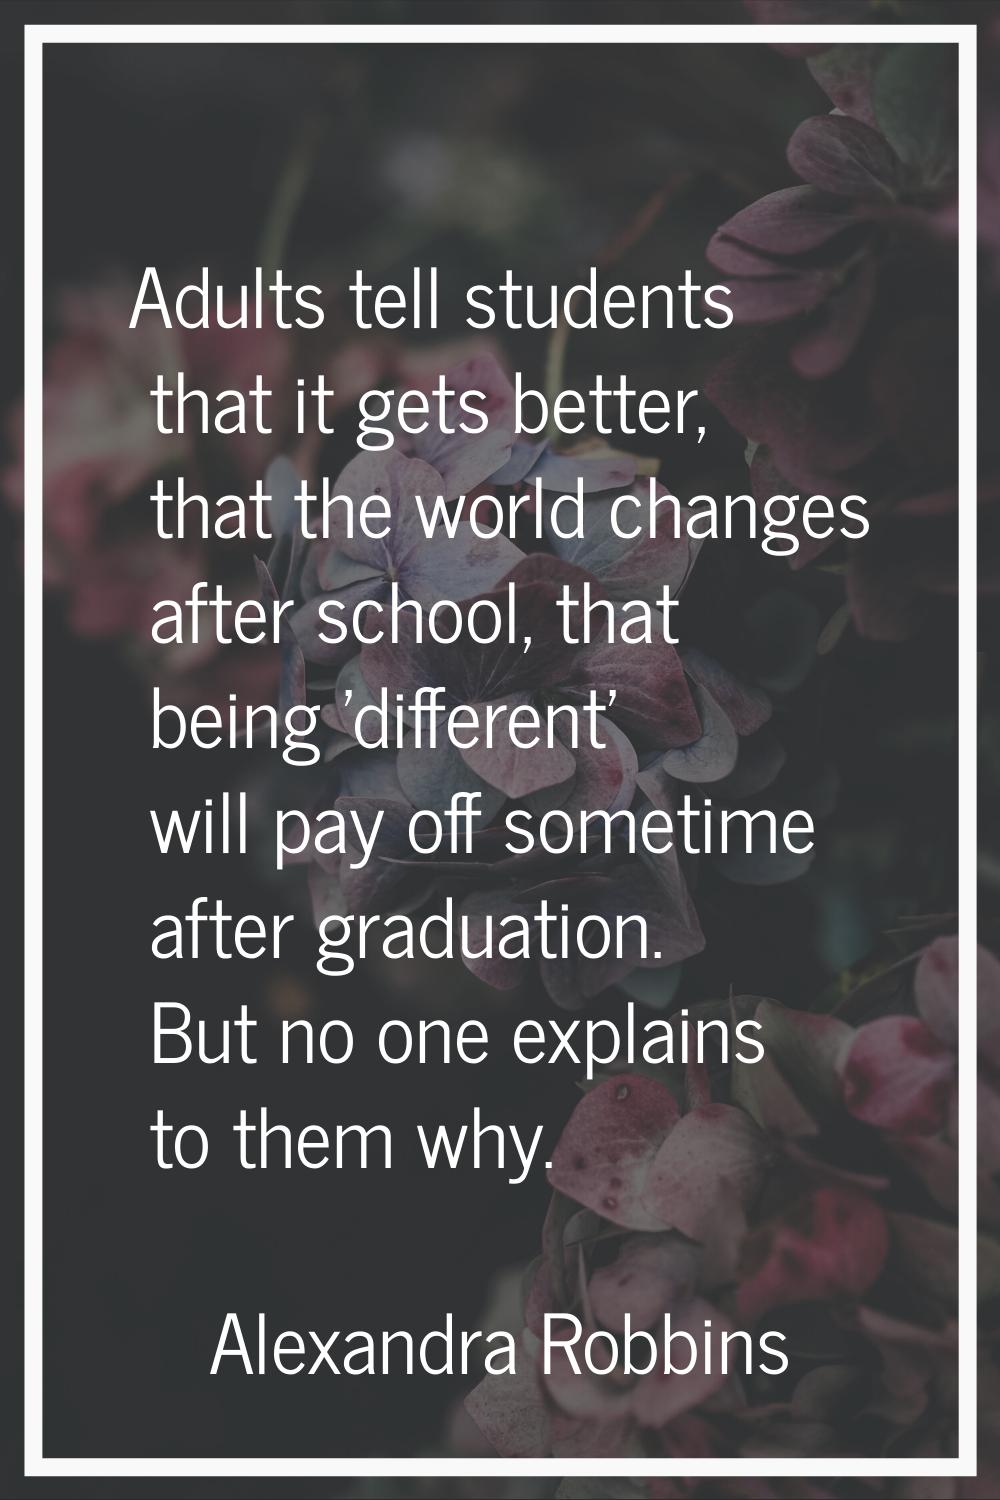 Adults tell students that it gets better, that the world changes after school, that being 'differen